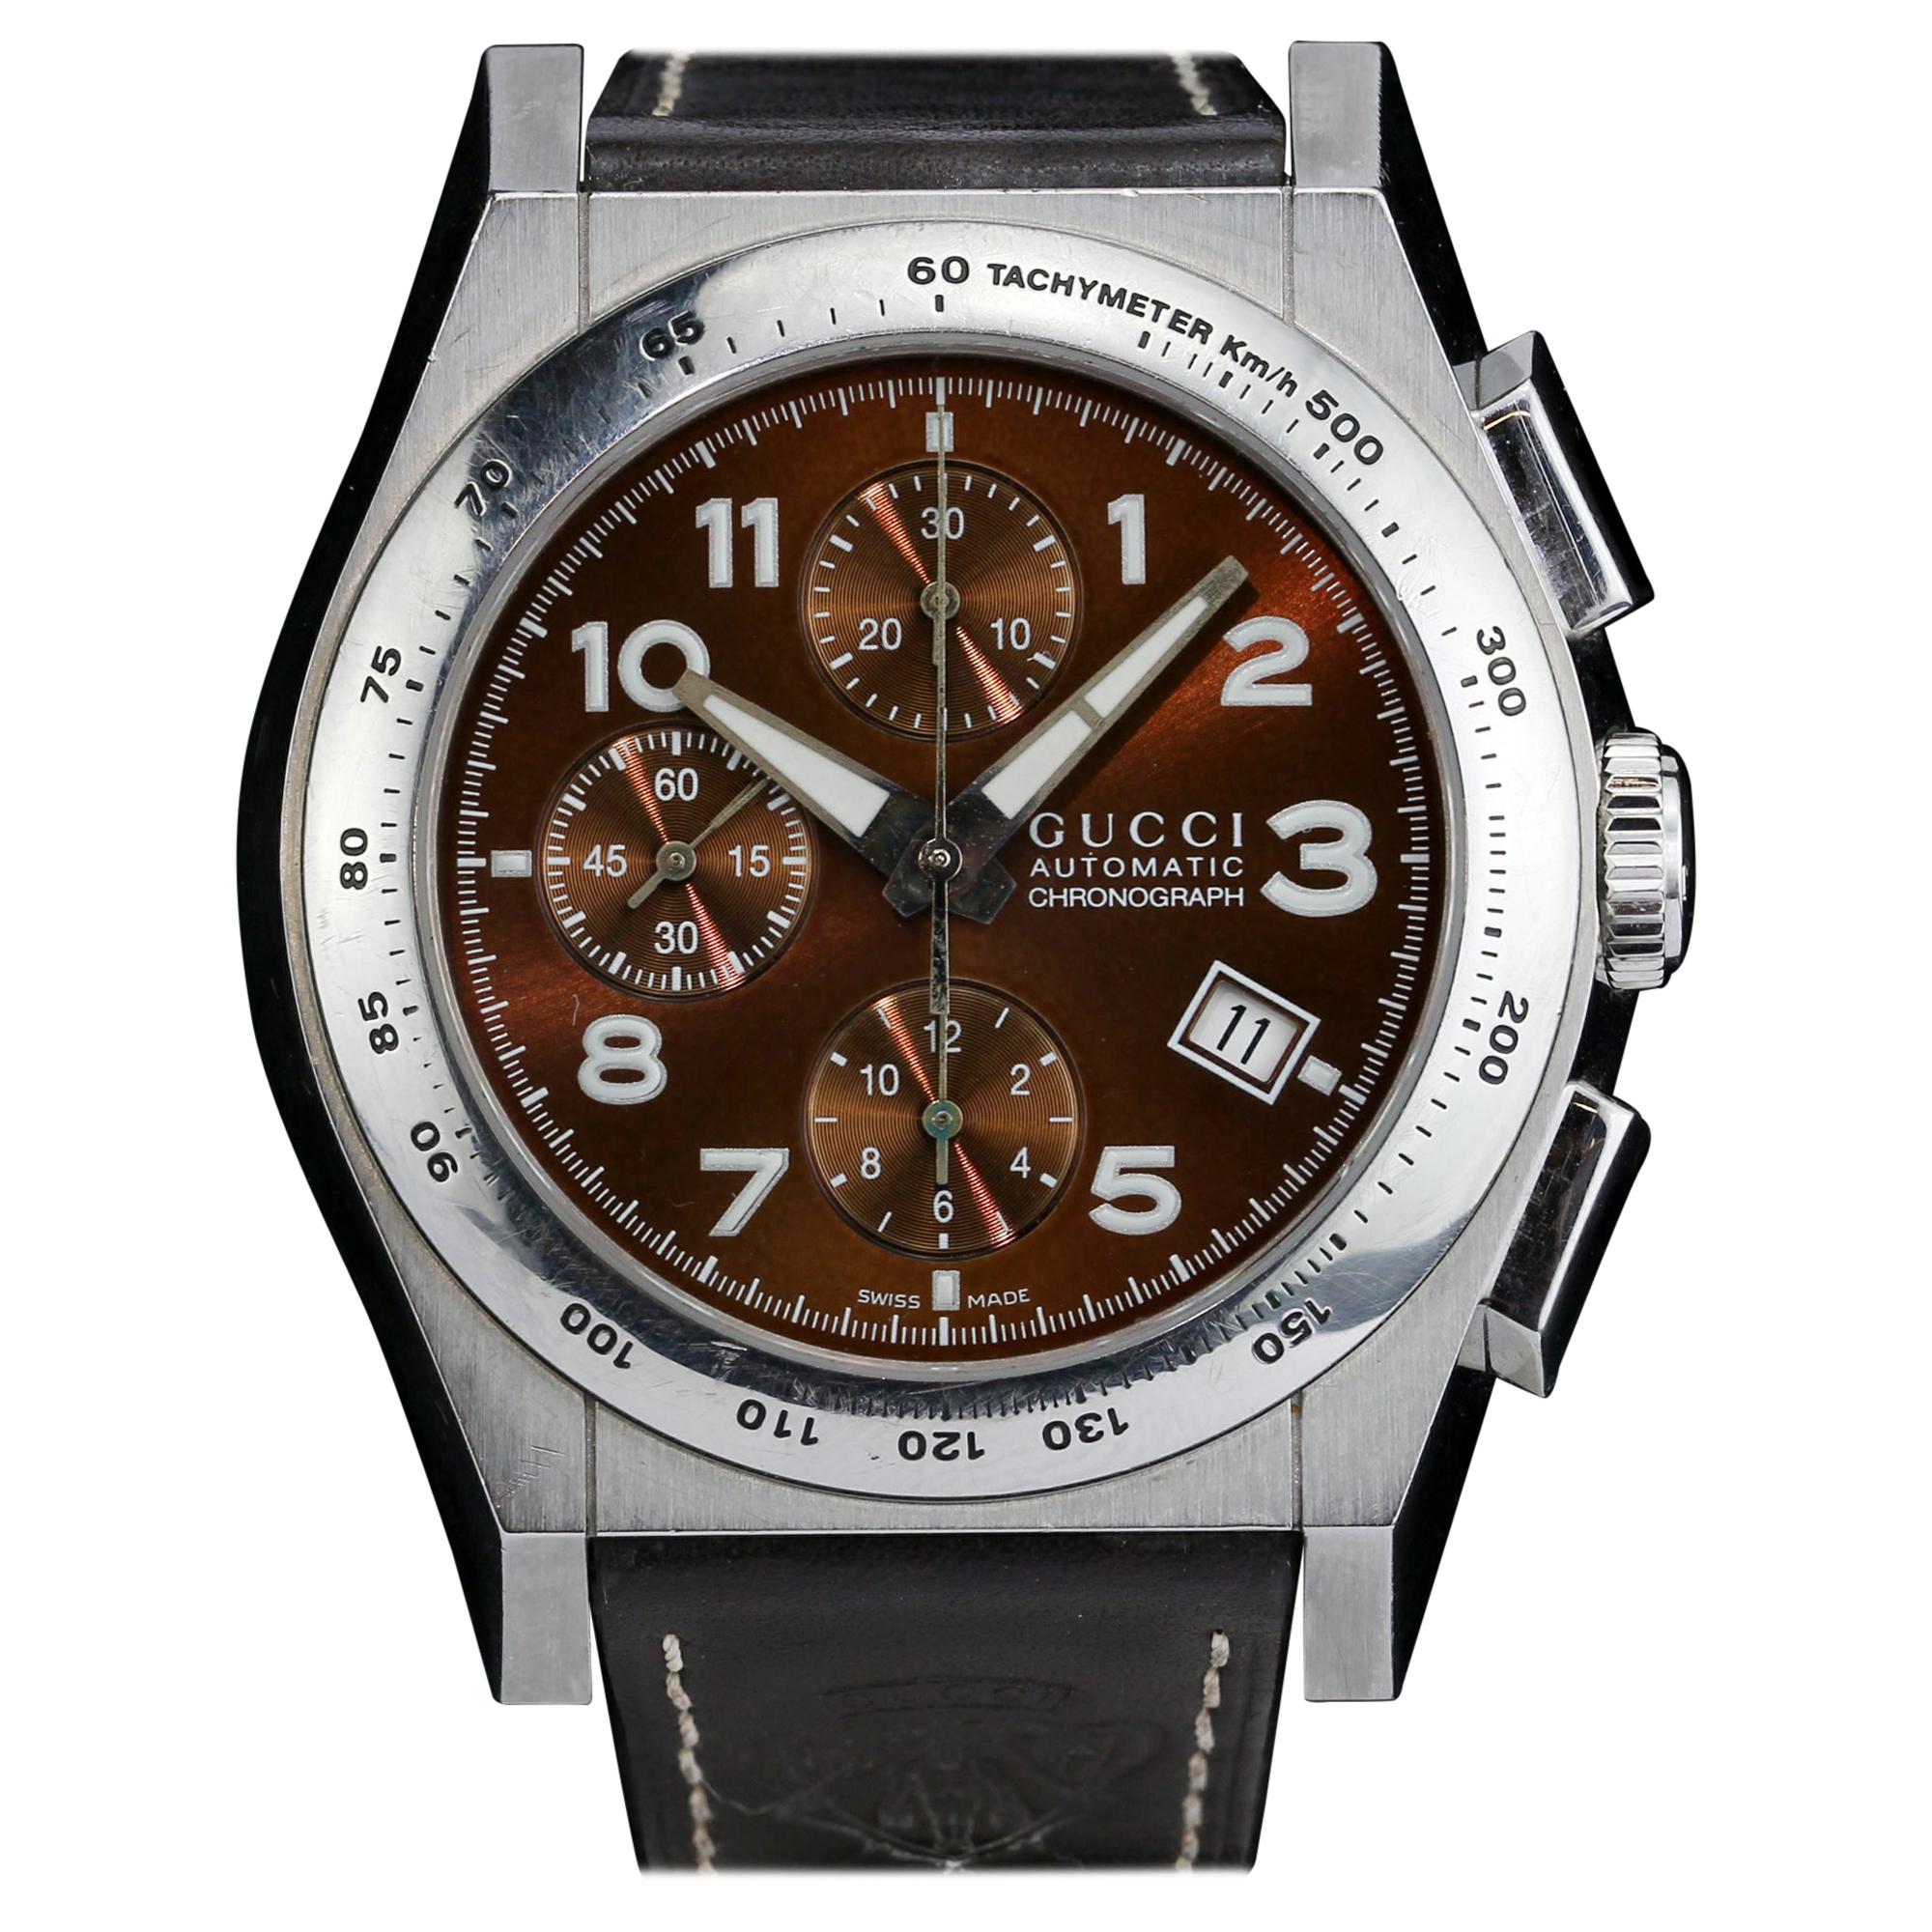 Gucci Pantheon Automatic Chronograph Watch with Full Set